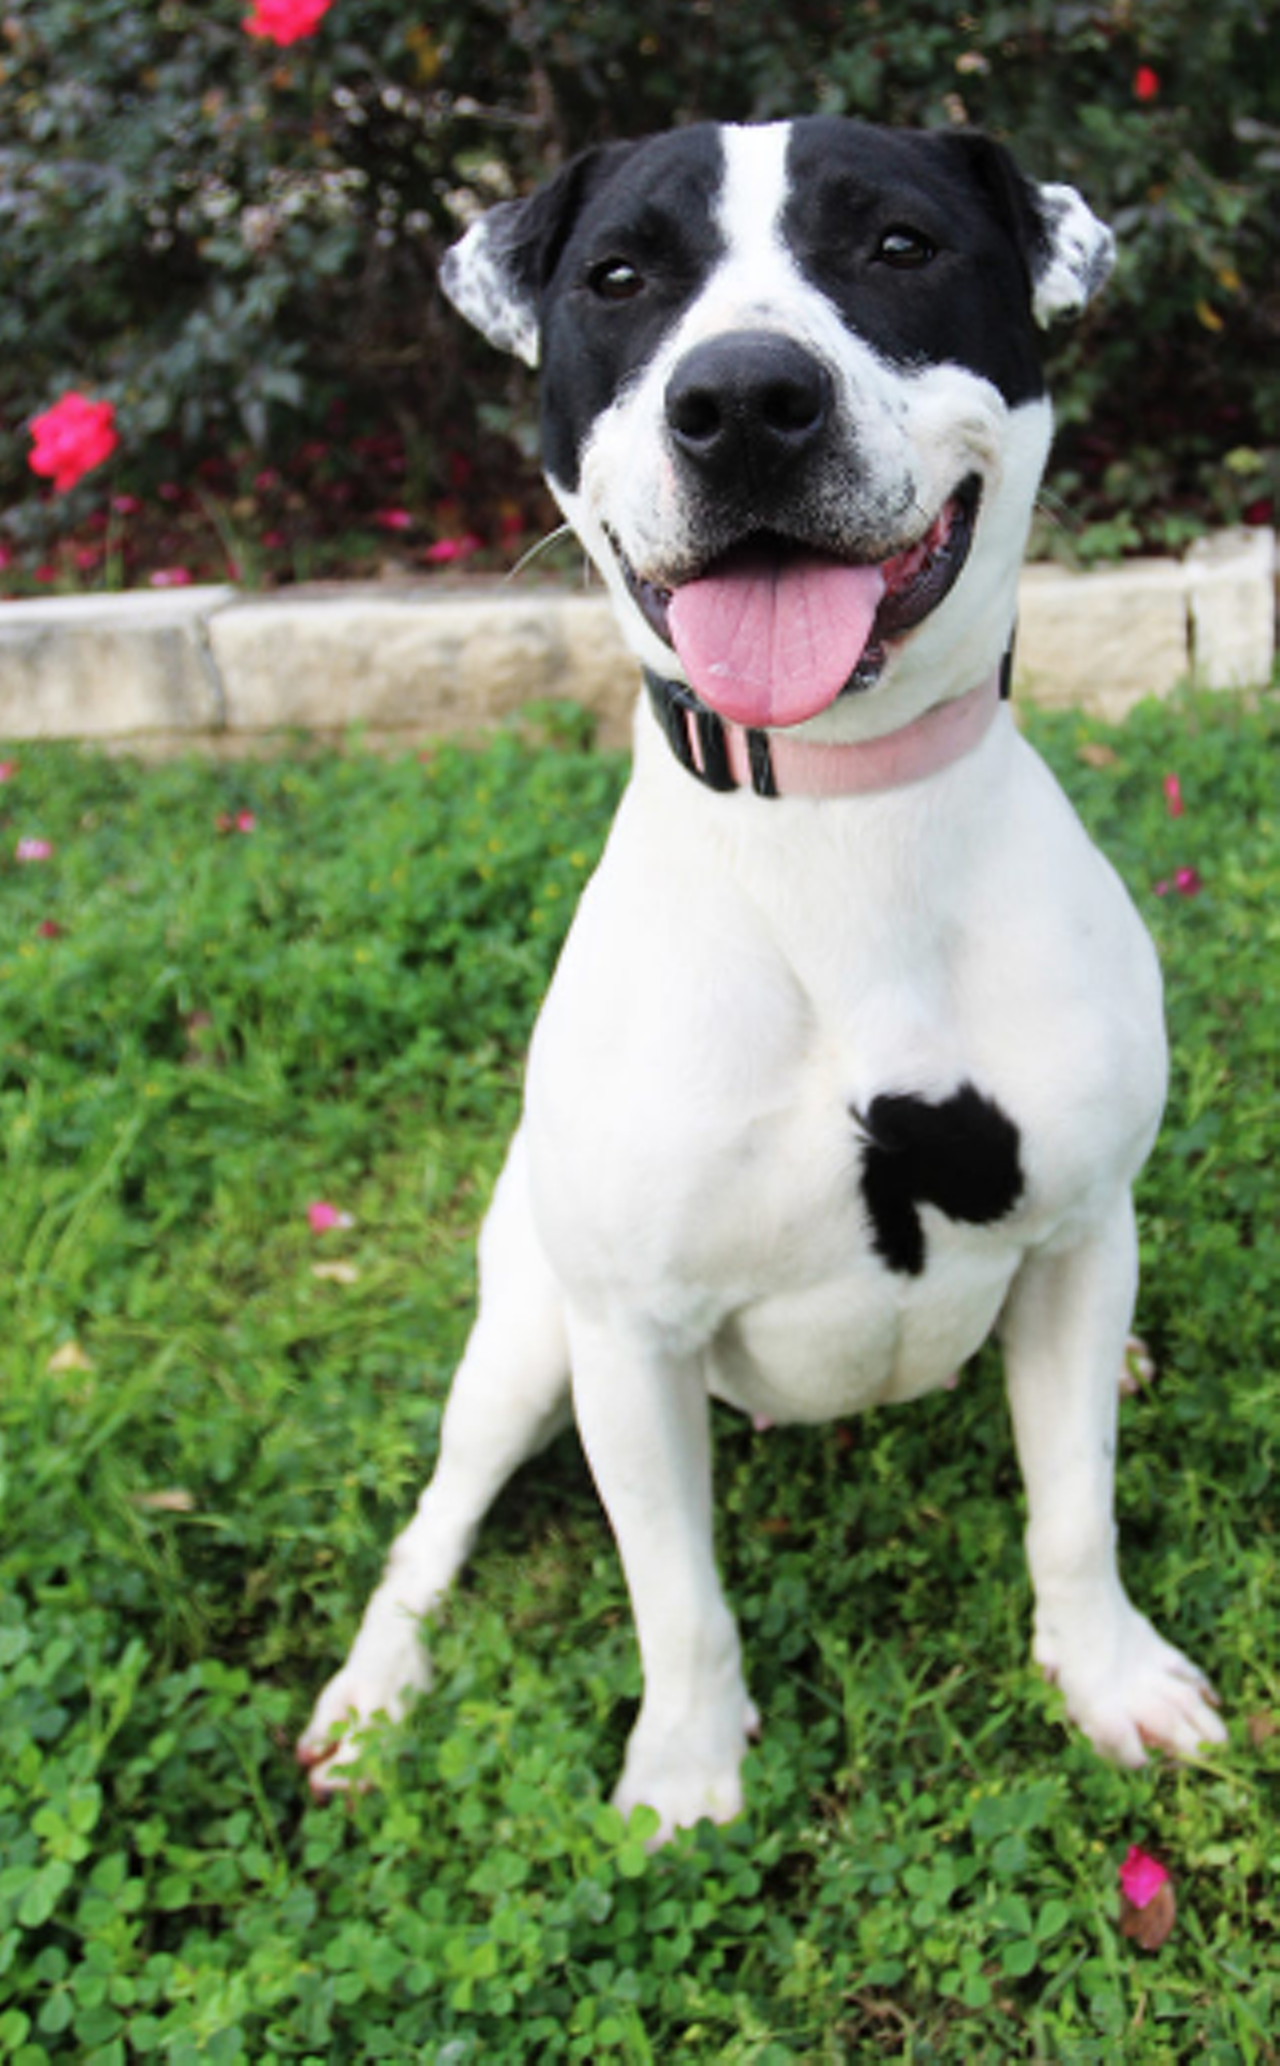 Navy
"Hi, I’m Navy! I’m a playful gal who loves to have a jolly good time! My zippy personality will fit in perfectly with someone with an active lifestyle! I will be sure to bring lots of cheer and joy to any home. I would like to meet any possible fur-siblings to see how well we get along. If you’re looking for a fun sidekick, then please give me a chance to fill that position!"